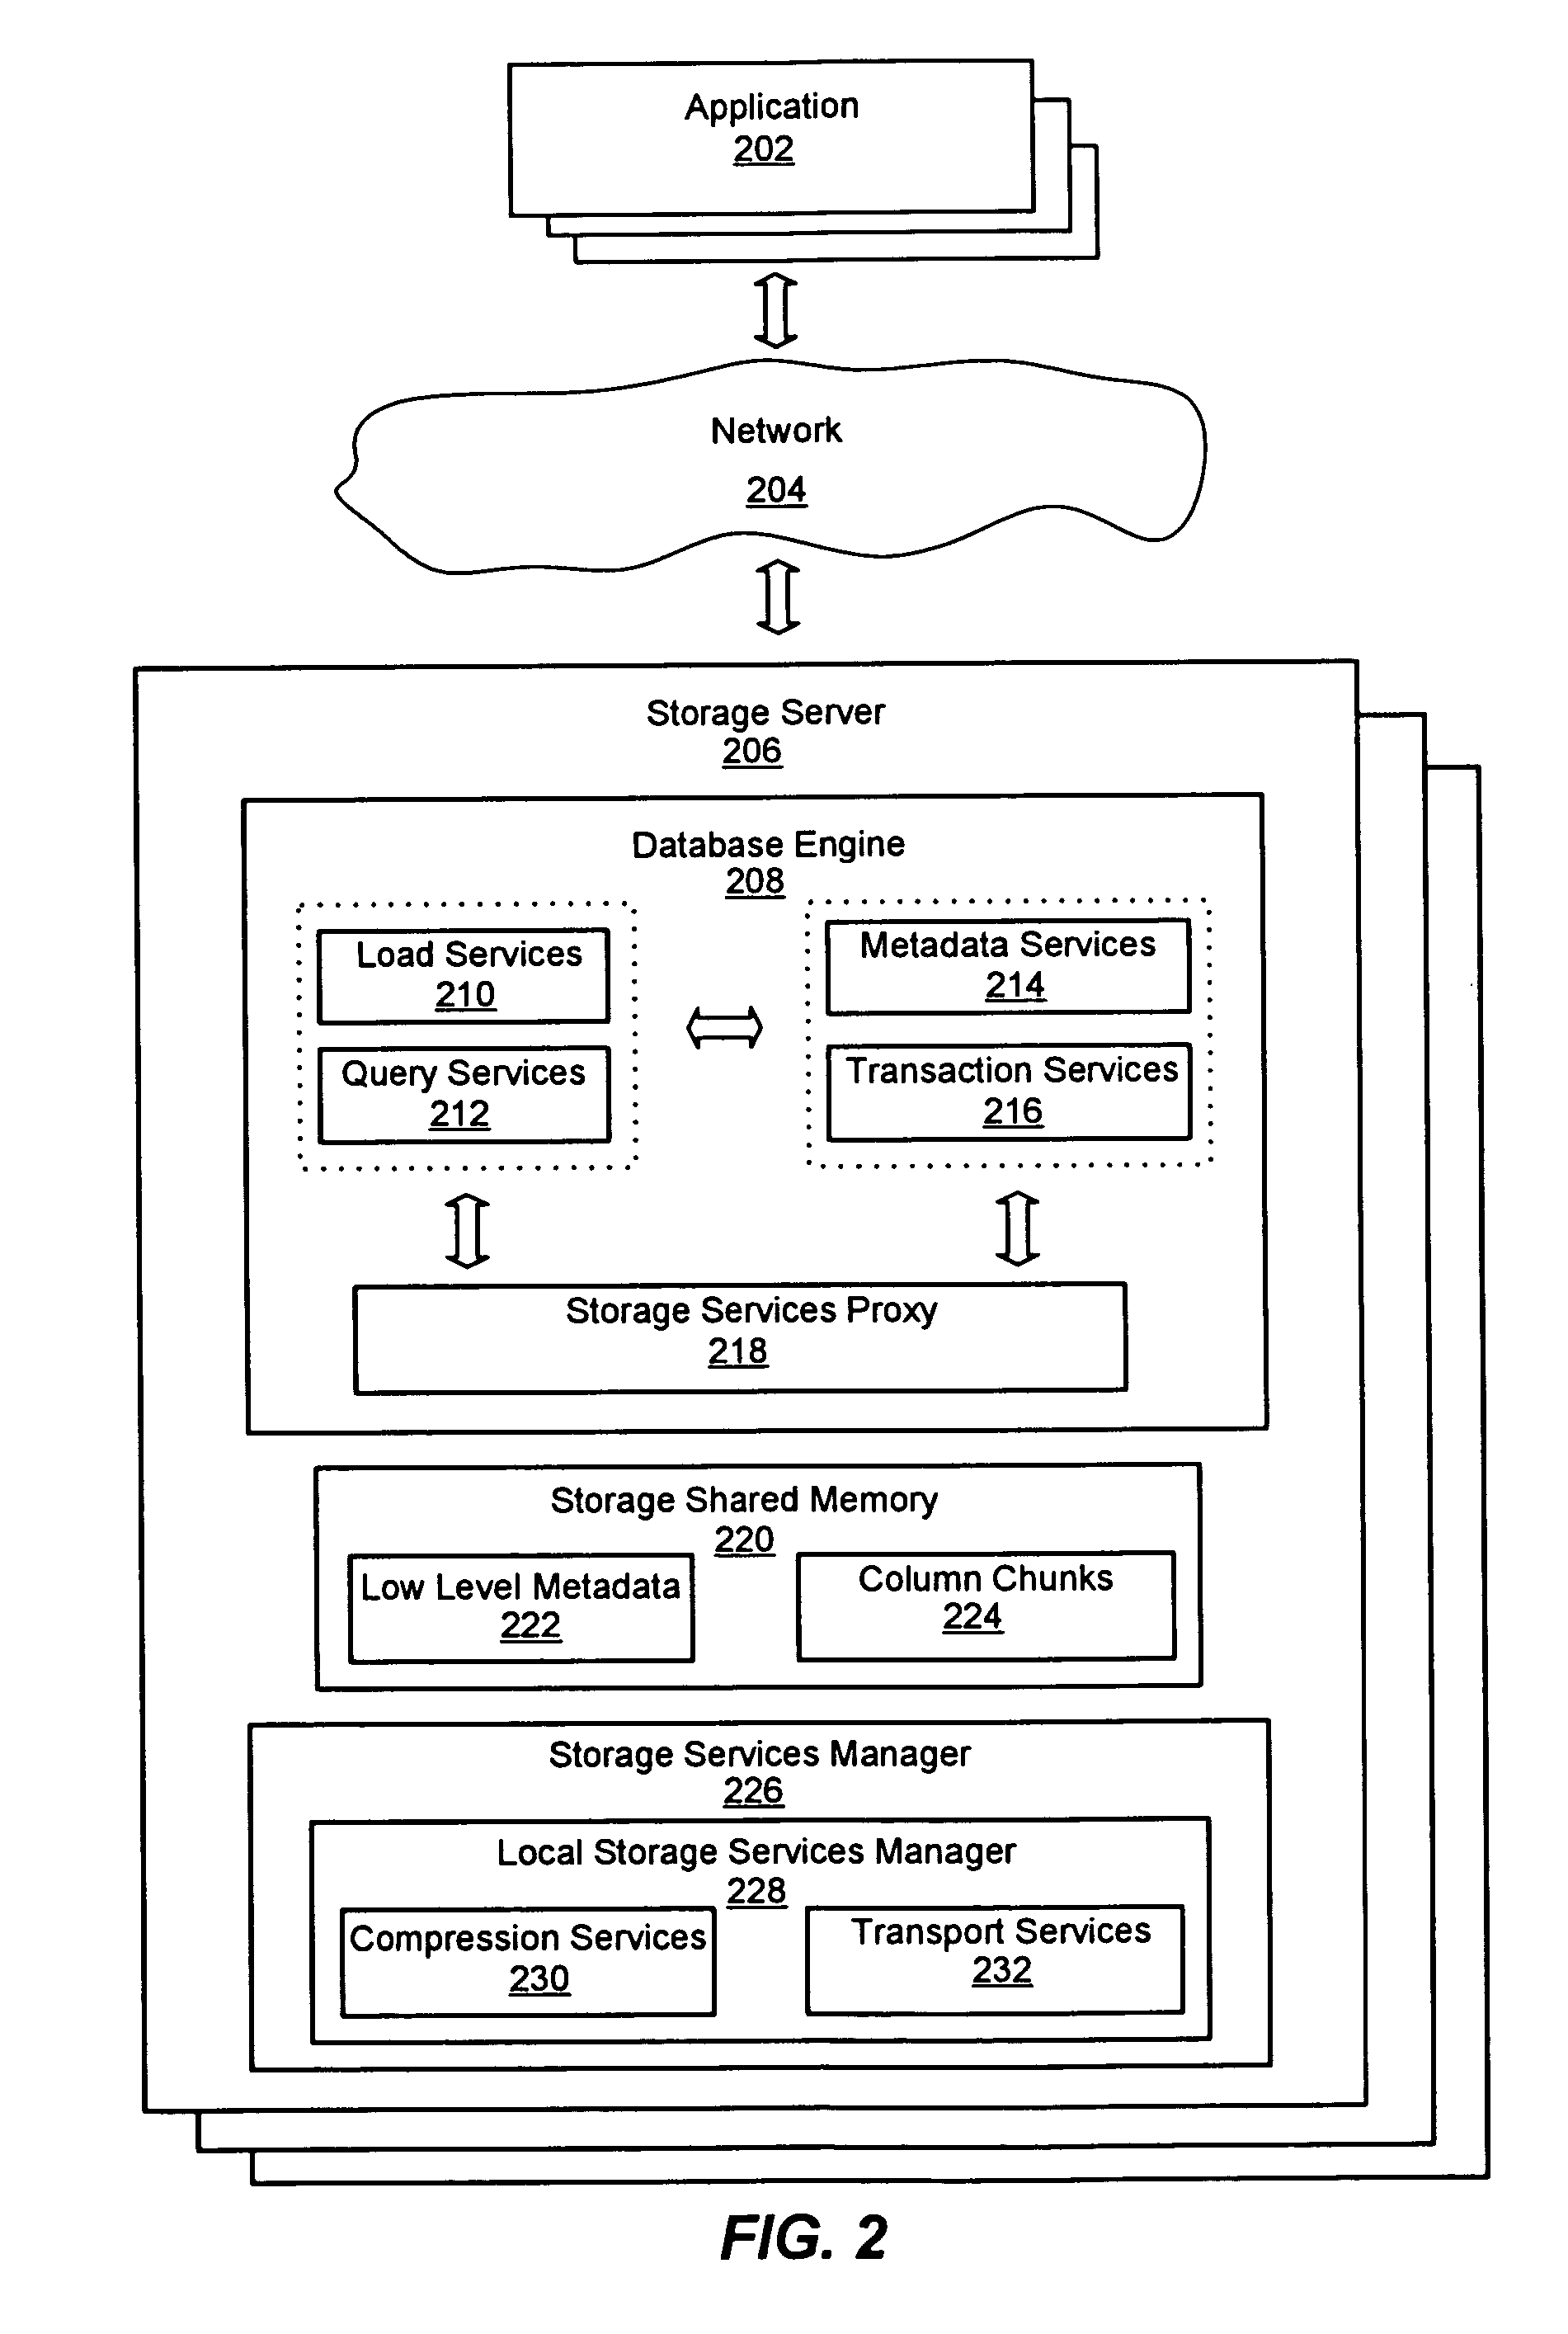 System and method for adding a storage server in a distributed column chunk data store